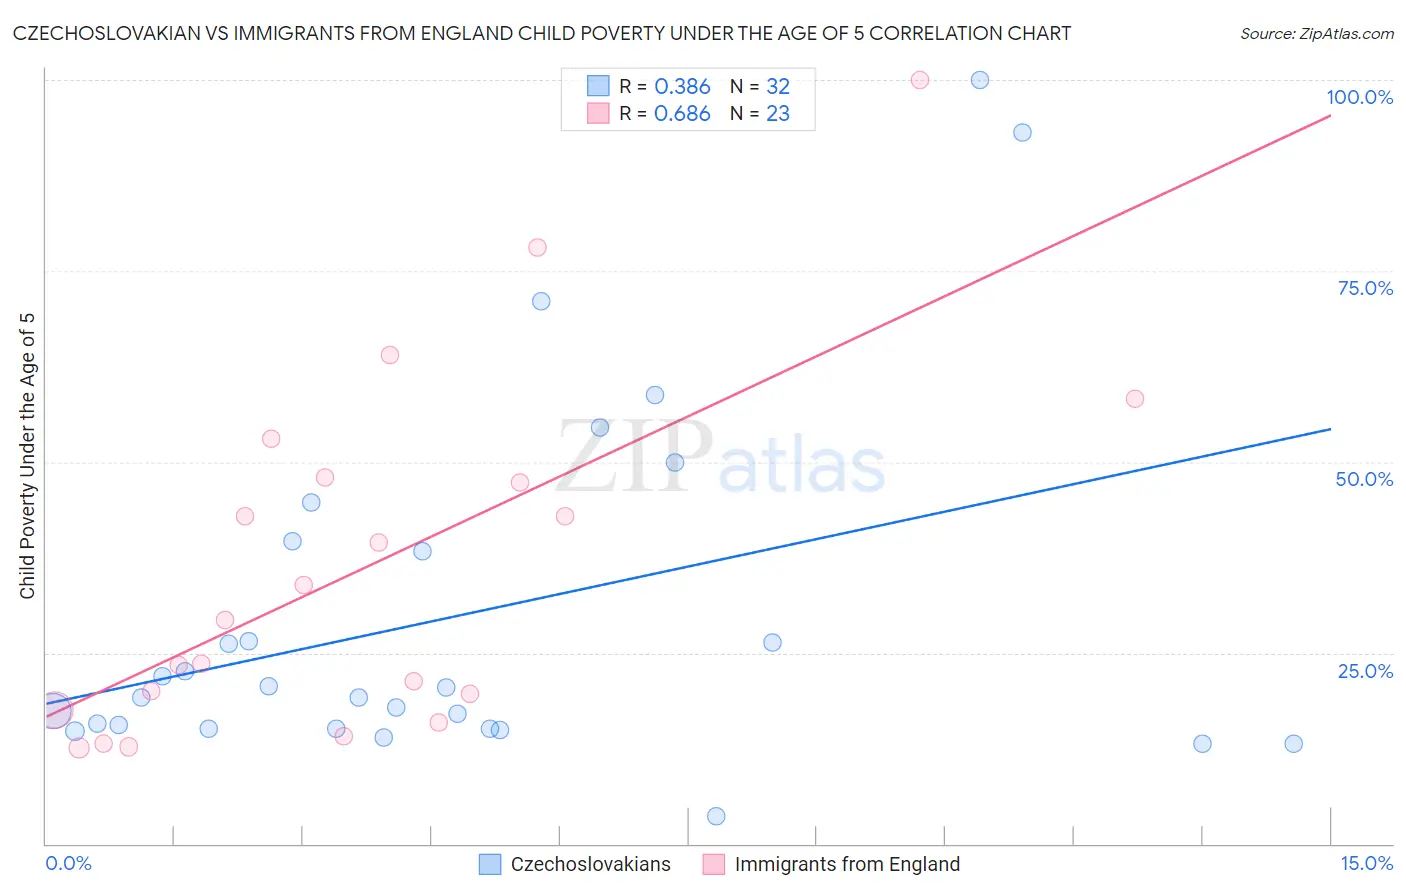 Czechoslovakian vs Immigrants from England Child Poverty Under the Age of 5